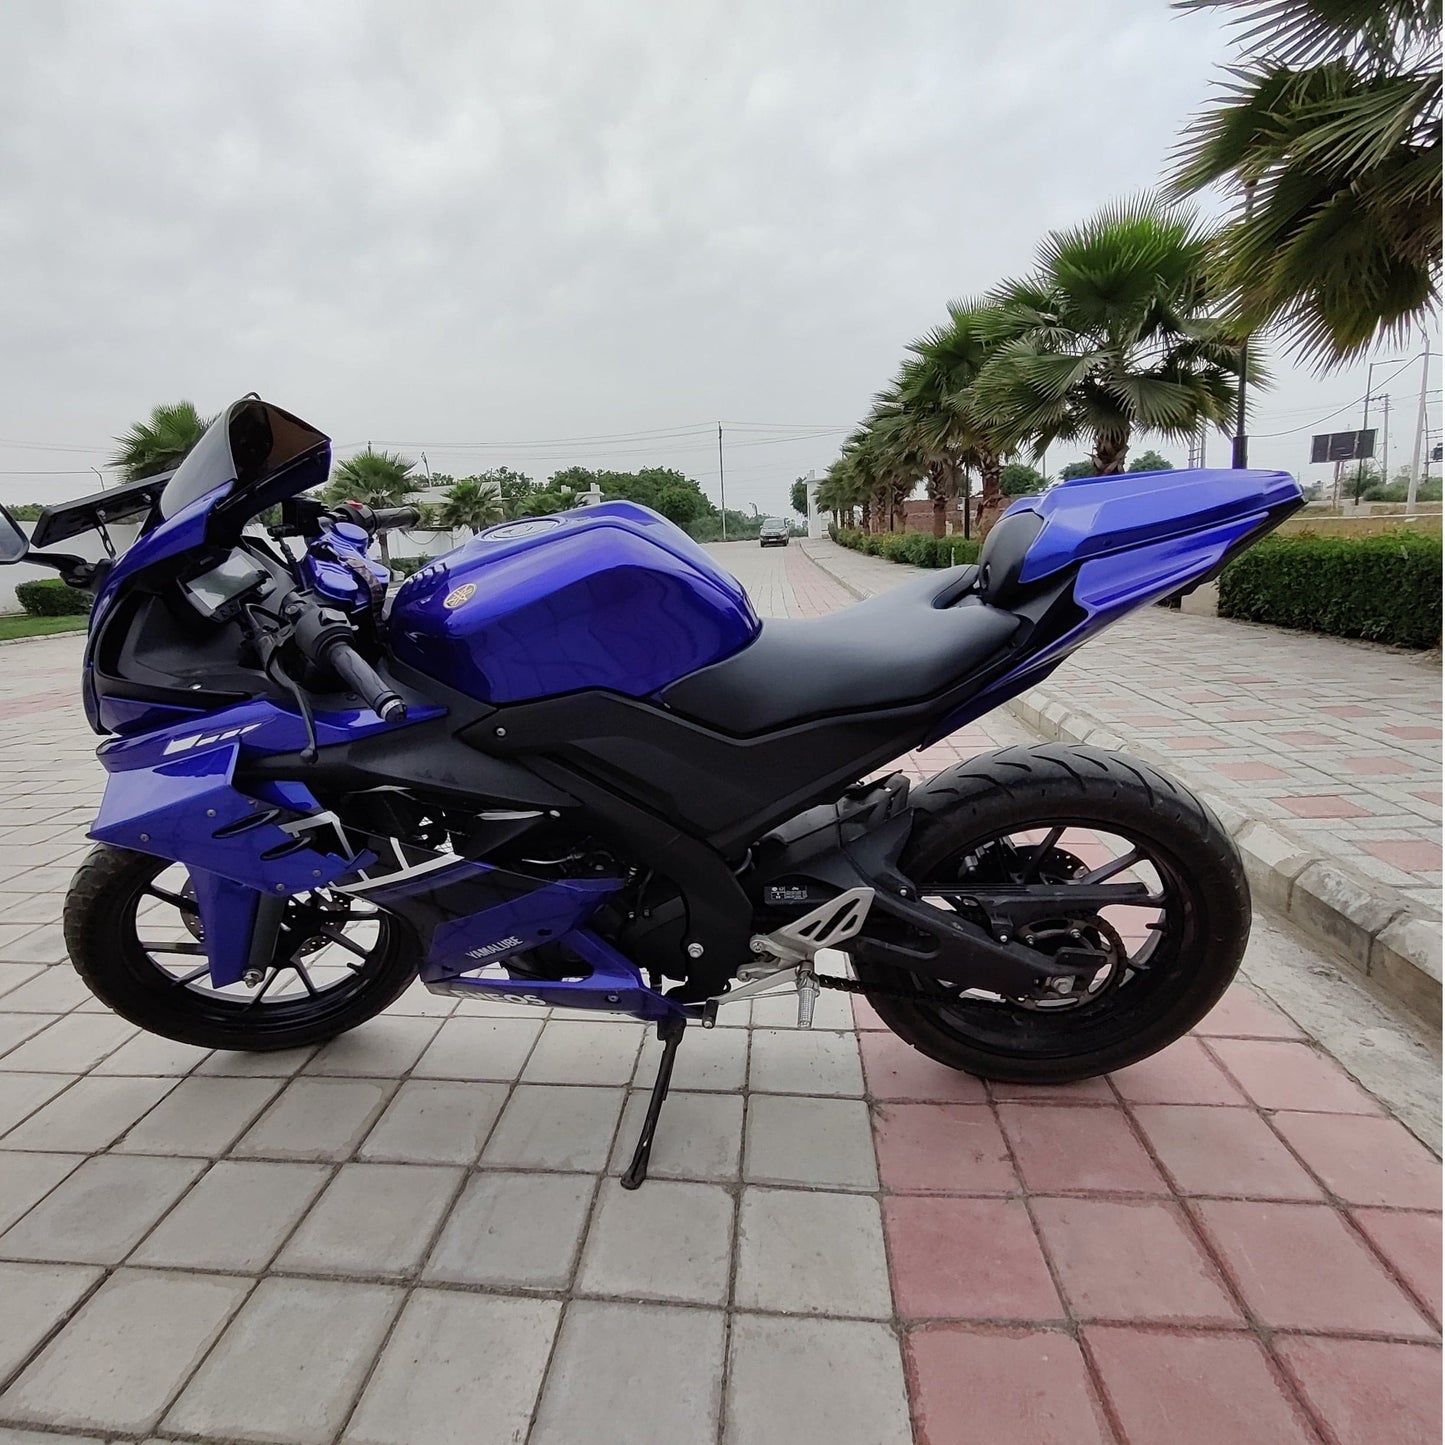 Yamaha R15 V3 Accessories | Modified R15v3 | Best R15 Modification | Saiga Parts Seat Cowl